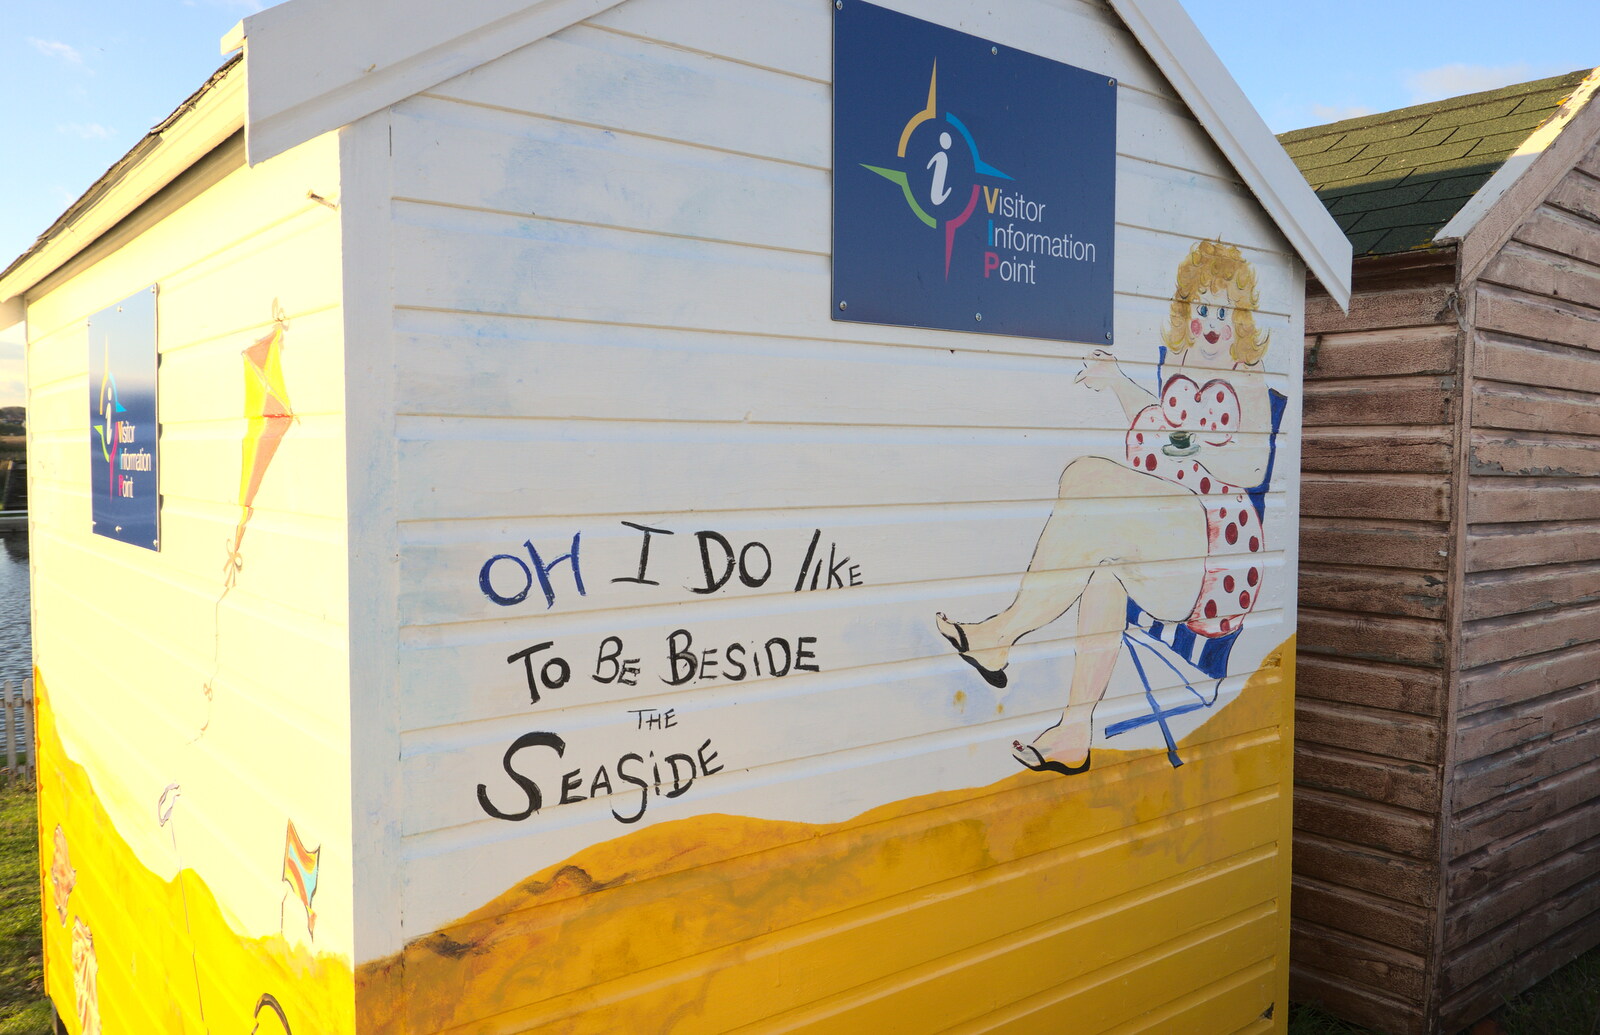 Saucy decoration on the tourist info beach hut from A Trip to the Amusements, Southwold Pier, Southwold, Suffolk - 5th November 2017